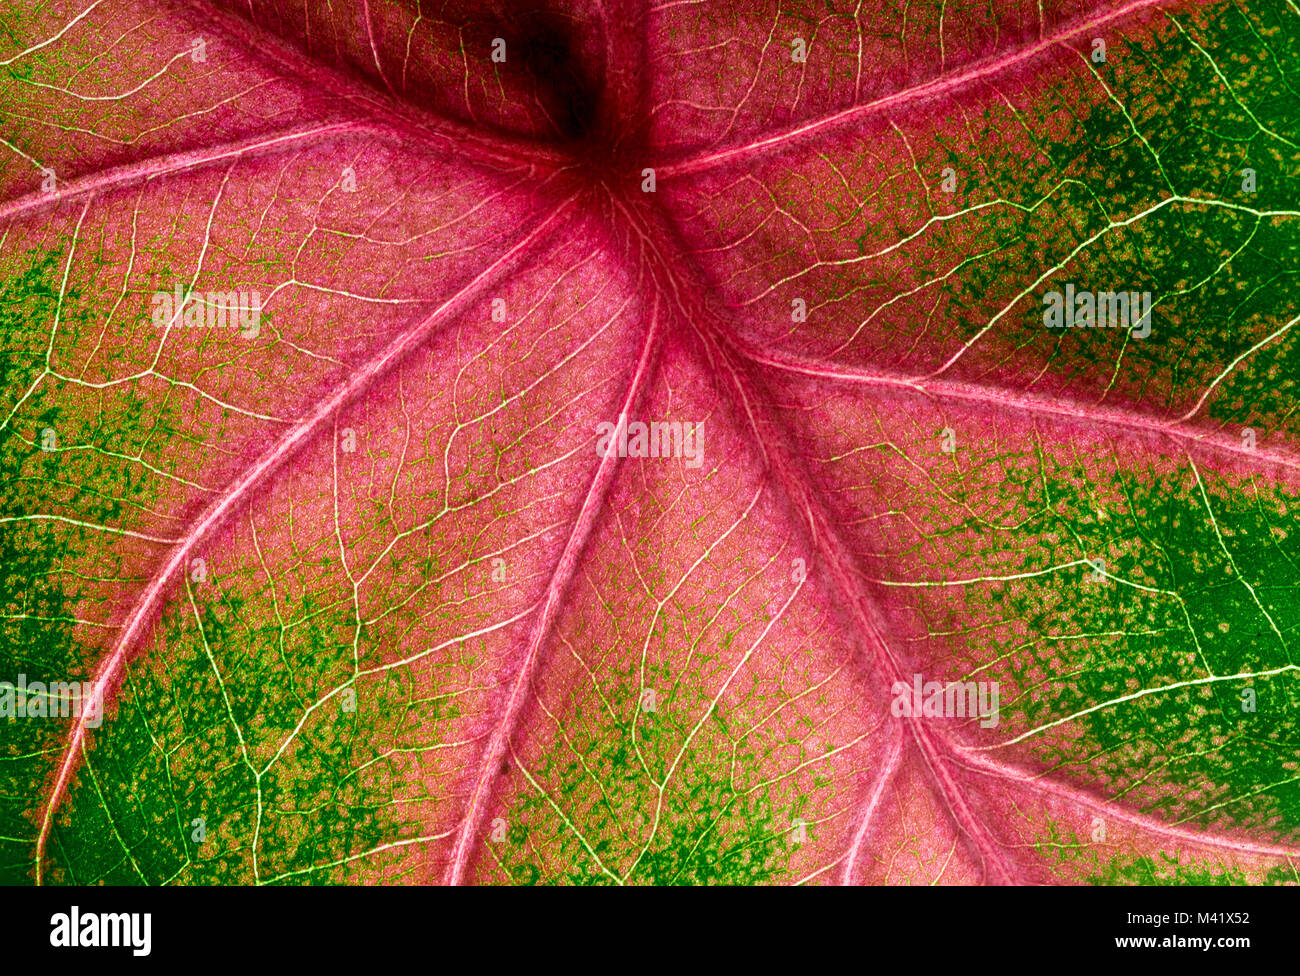 Caladium leaf (elephant ear) super macro closeup, showing details and red veins, abstract foliage background Stock Photo